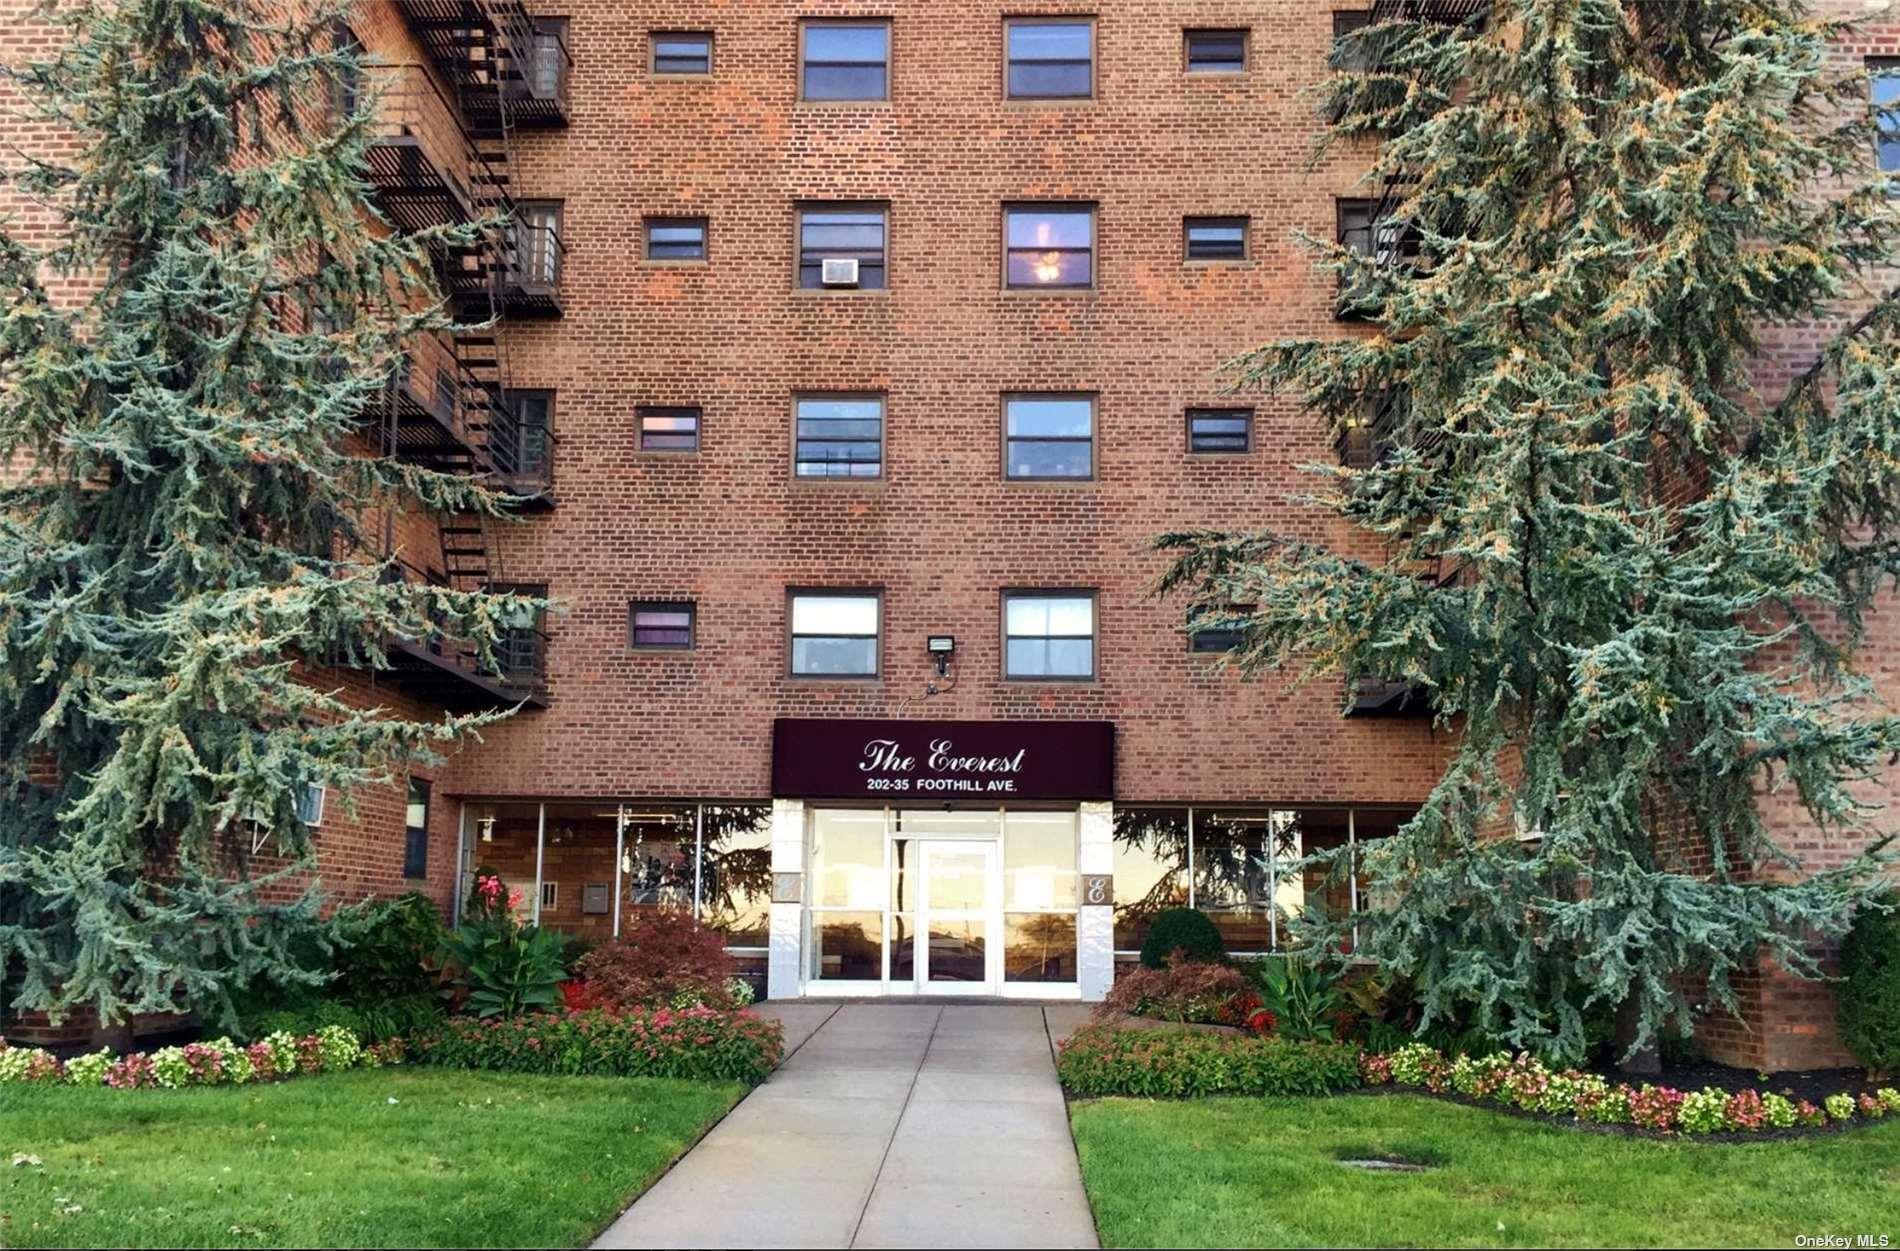 202-35 Foothill Avenue #A24 in Queens, Hollis, NY 11423